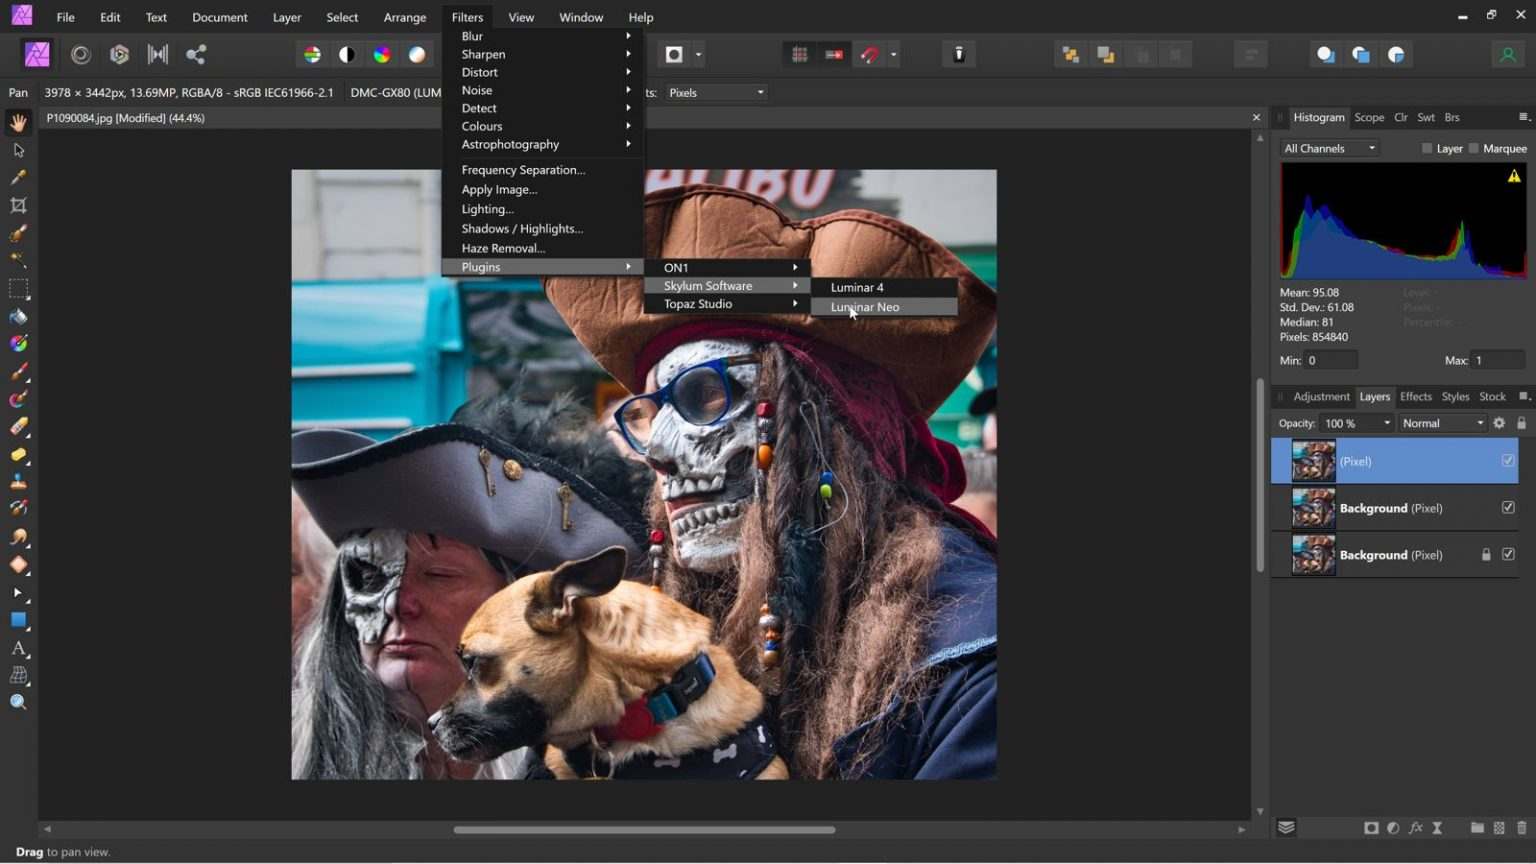 affinity photo plugins fire download